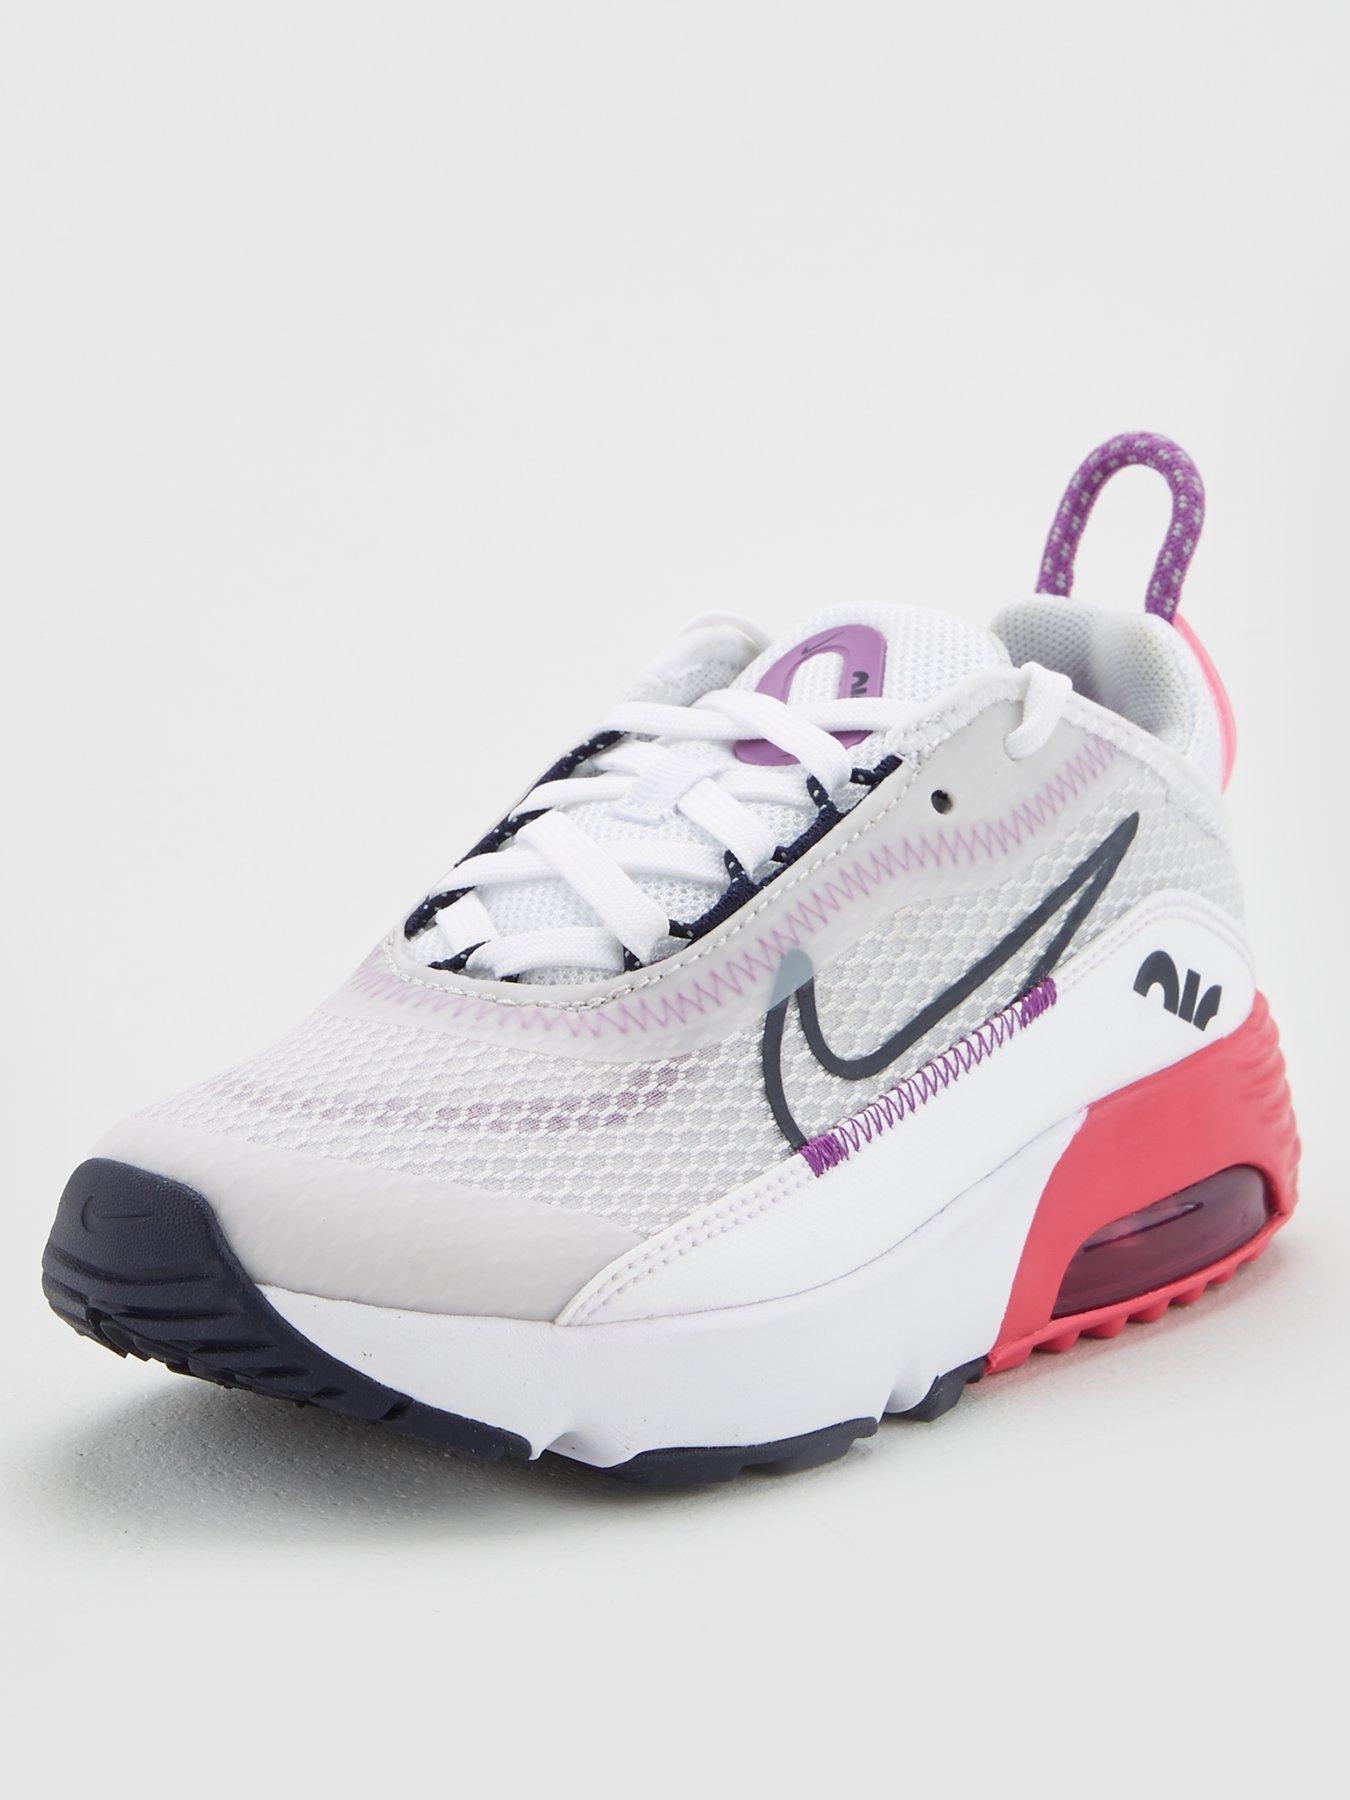 childrens size 1 nike air max